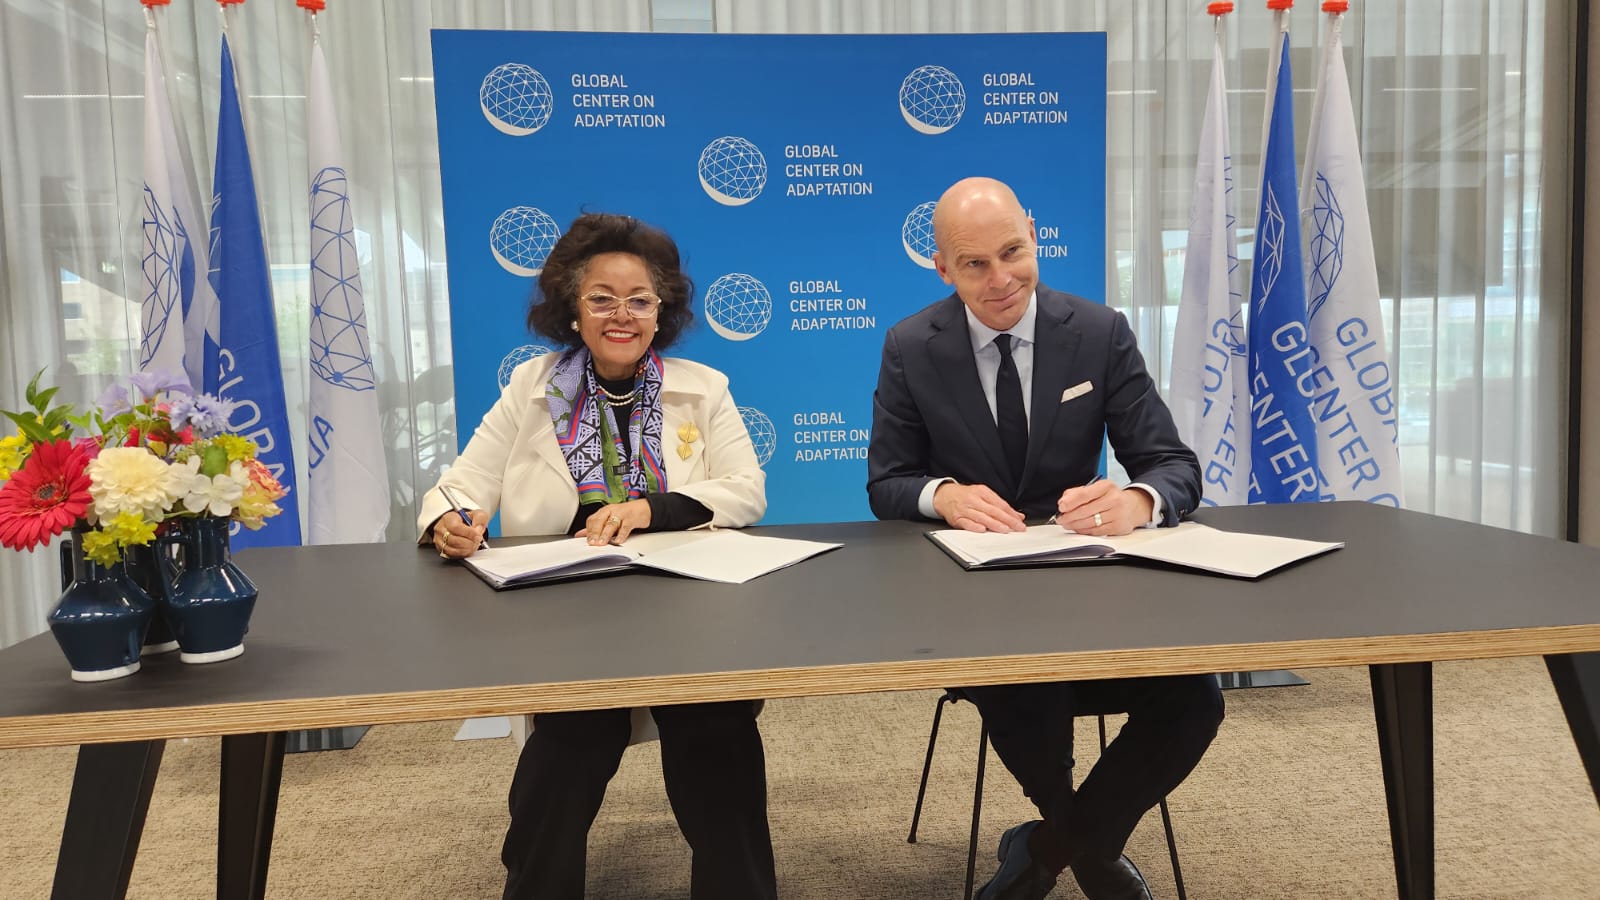 GCA and the African Union Development Agency (AUDA-NEPAD) signed a landmark memorandum of understanding (MoU) to collaborate on accelerating climate change adaptation efforts across Africa